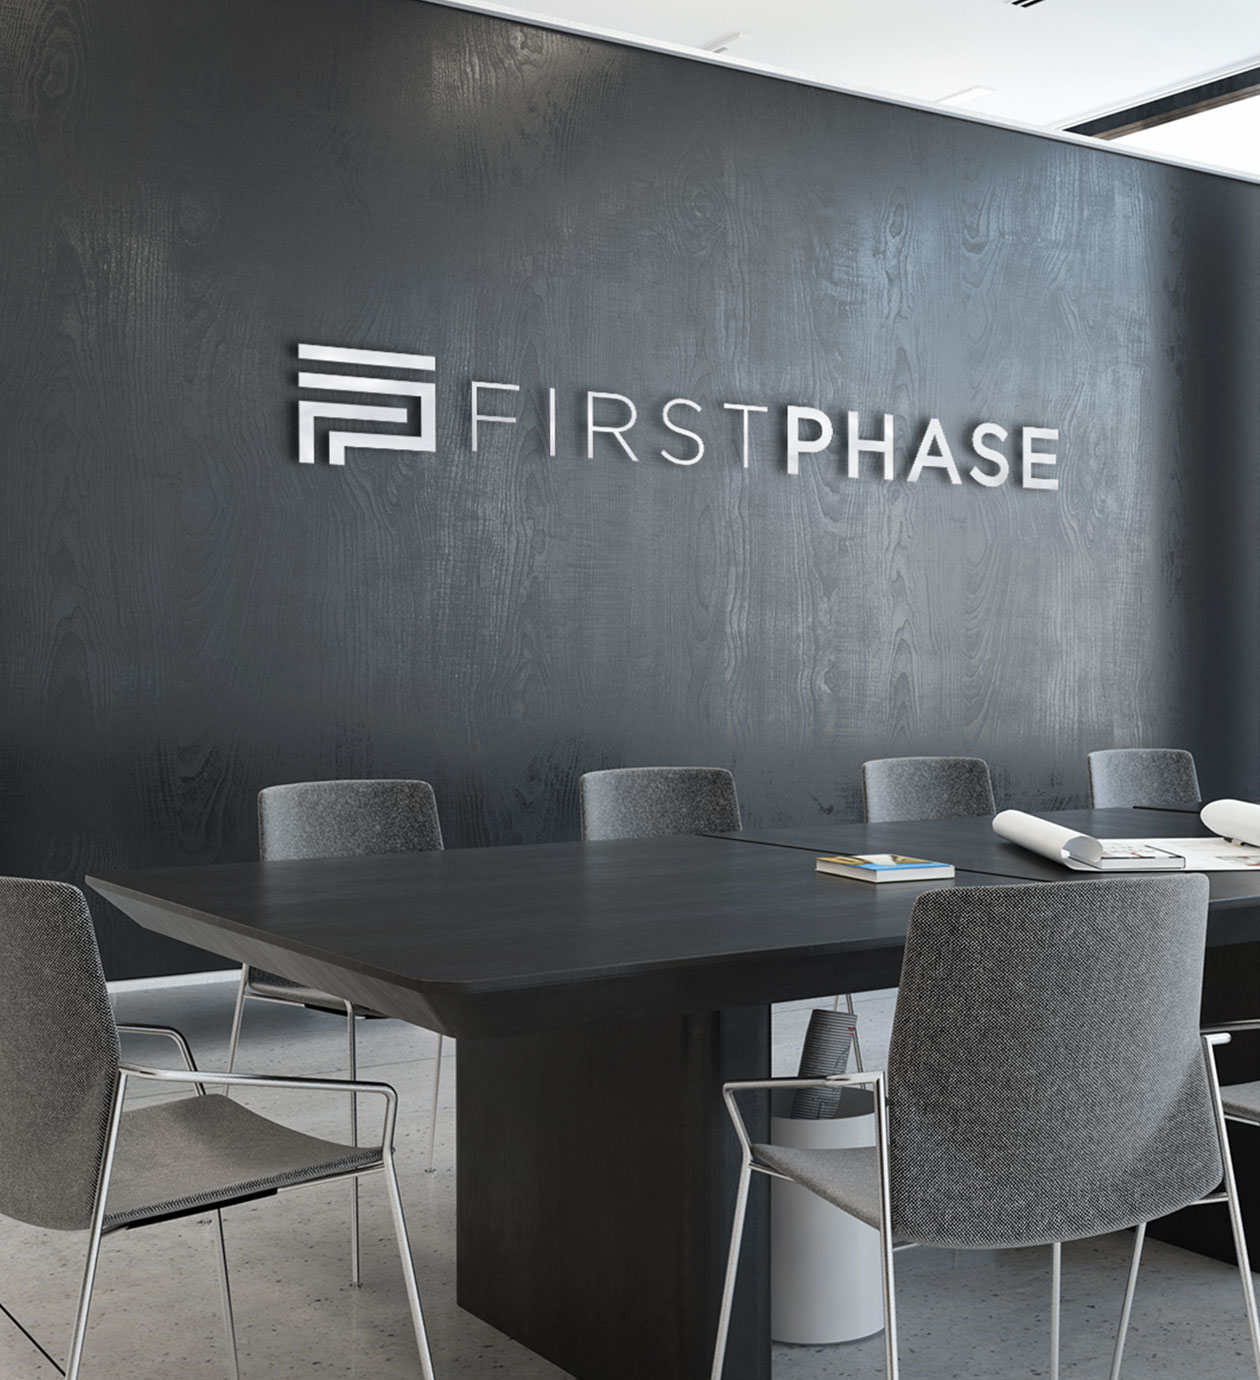 FirstPhase On Wall Logo